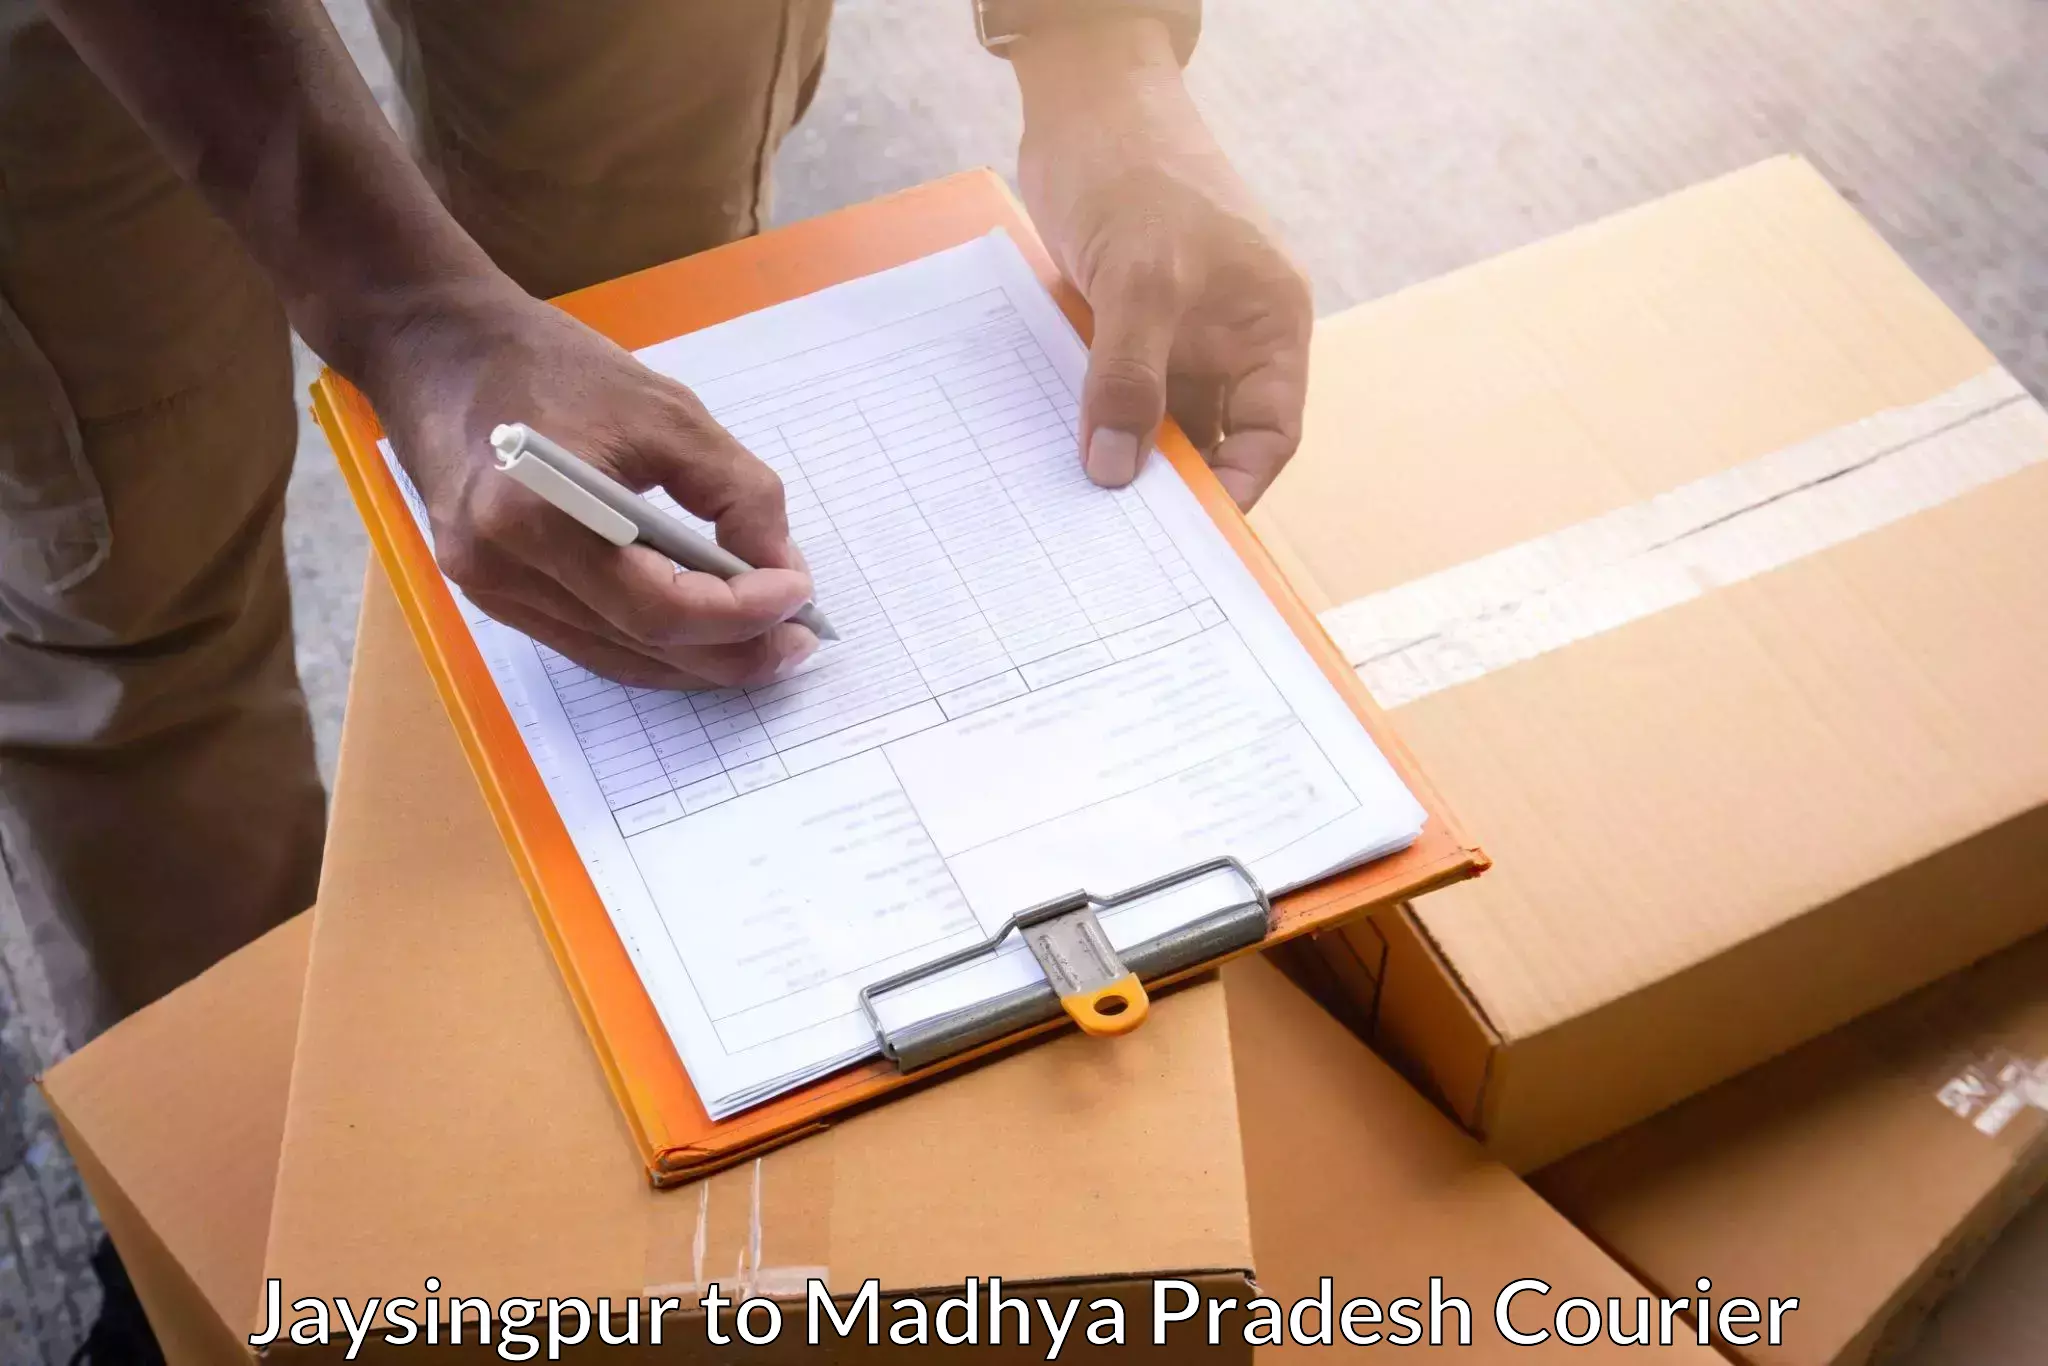 Online courier booking Jaysingpur to IIIT Bhopal